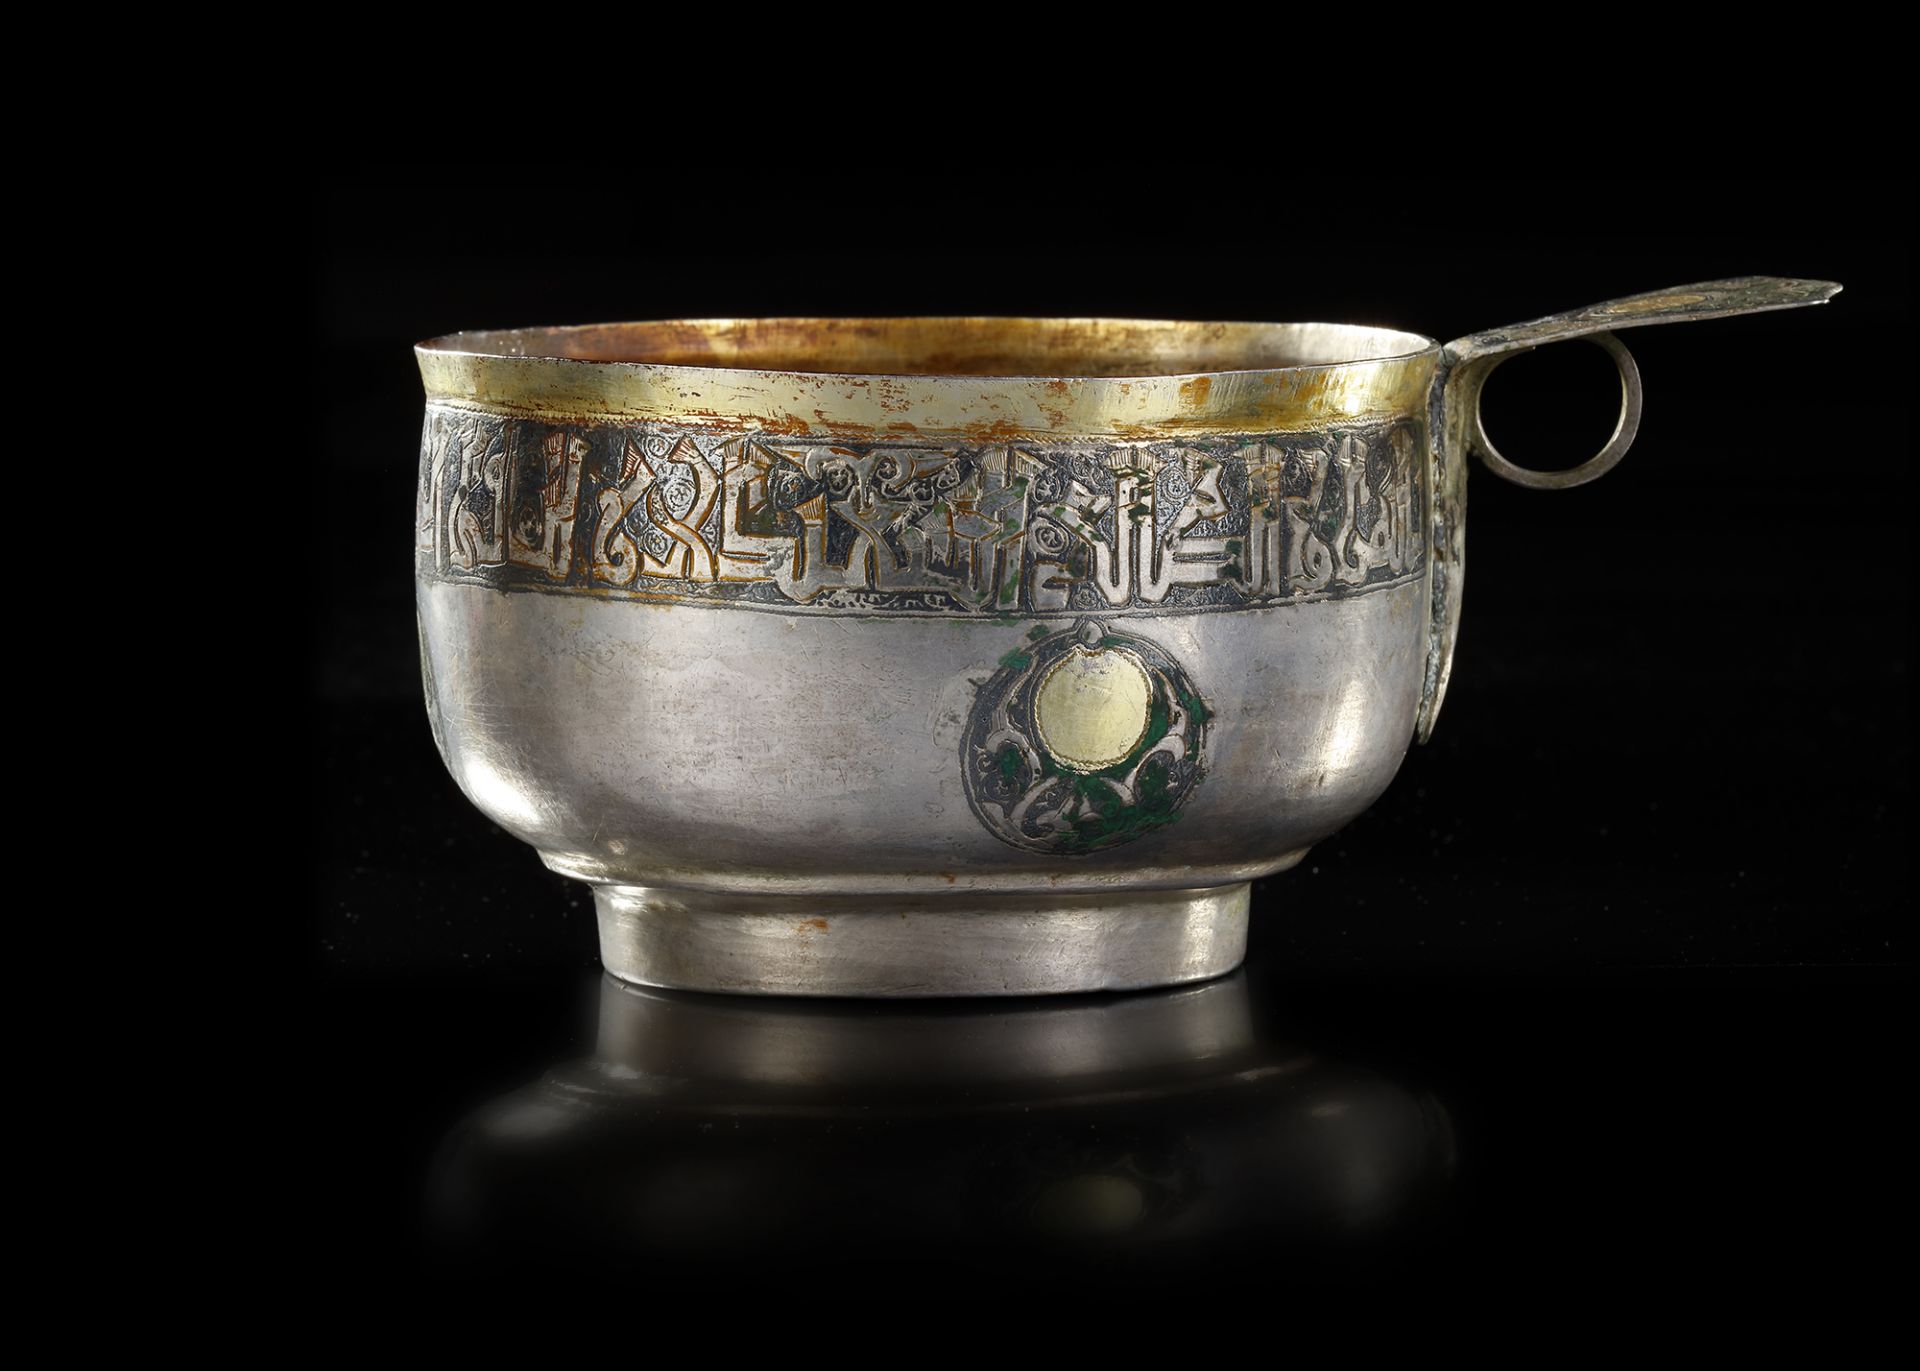 A RARE SILVER AND NIELLOED CUP WITH KUFIC INSCRIPTION, PERSIA OR CENTRAL ASIA, 11TH-12TH CENTURY